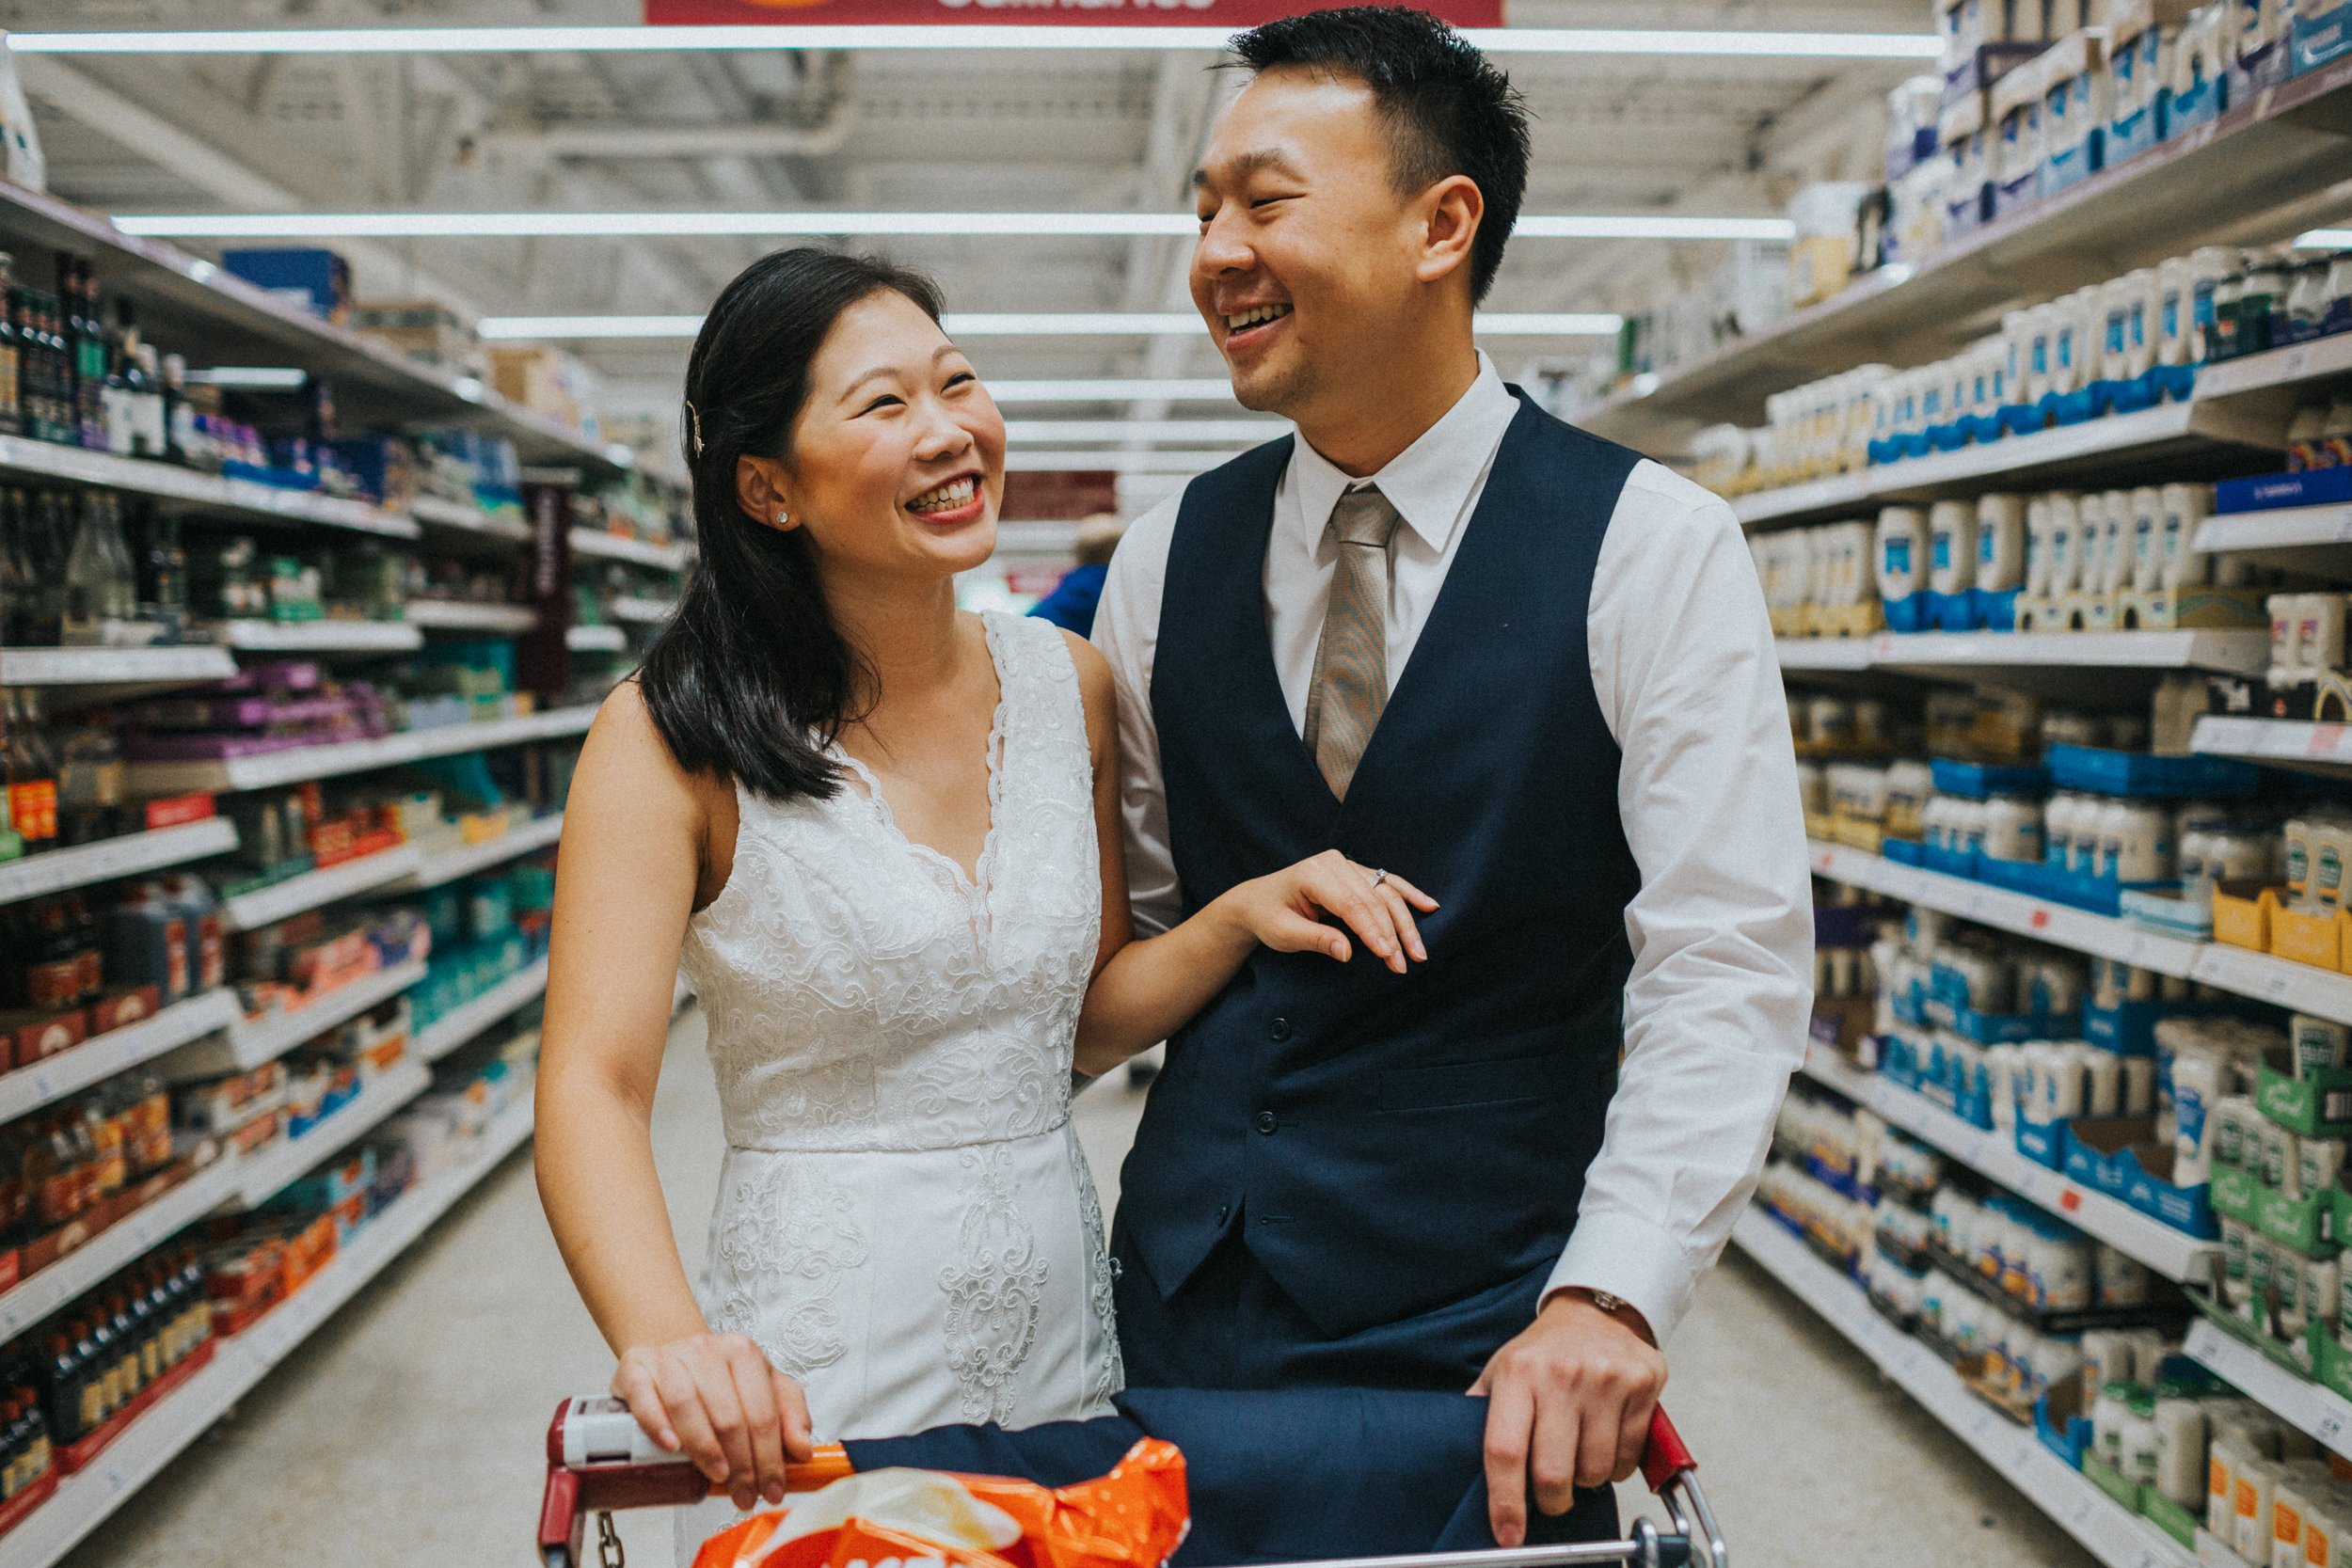 Couple smiling together in supermarket. 